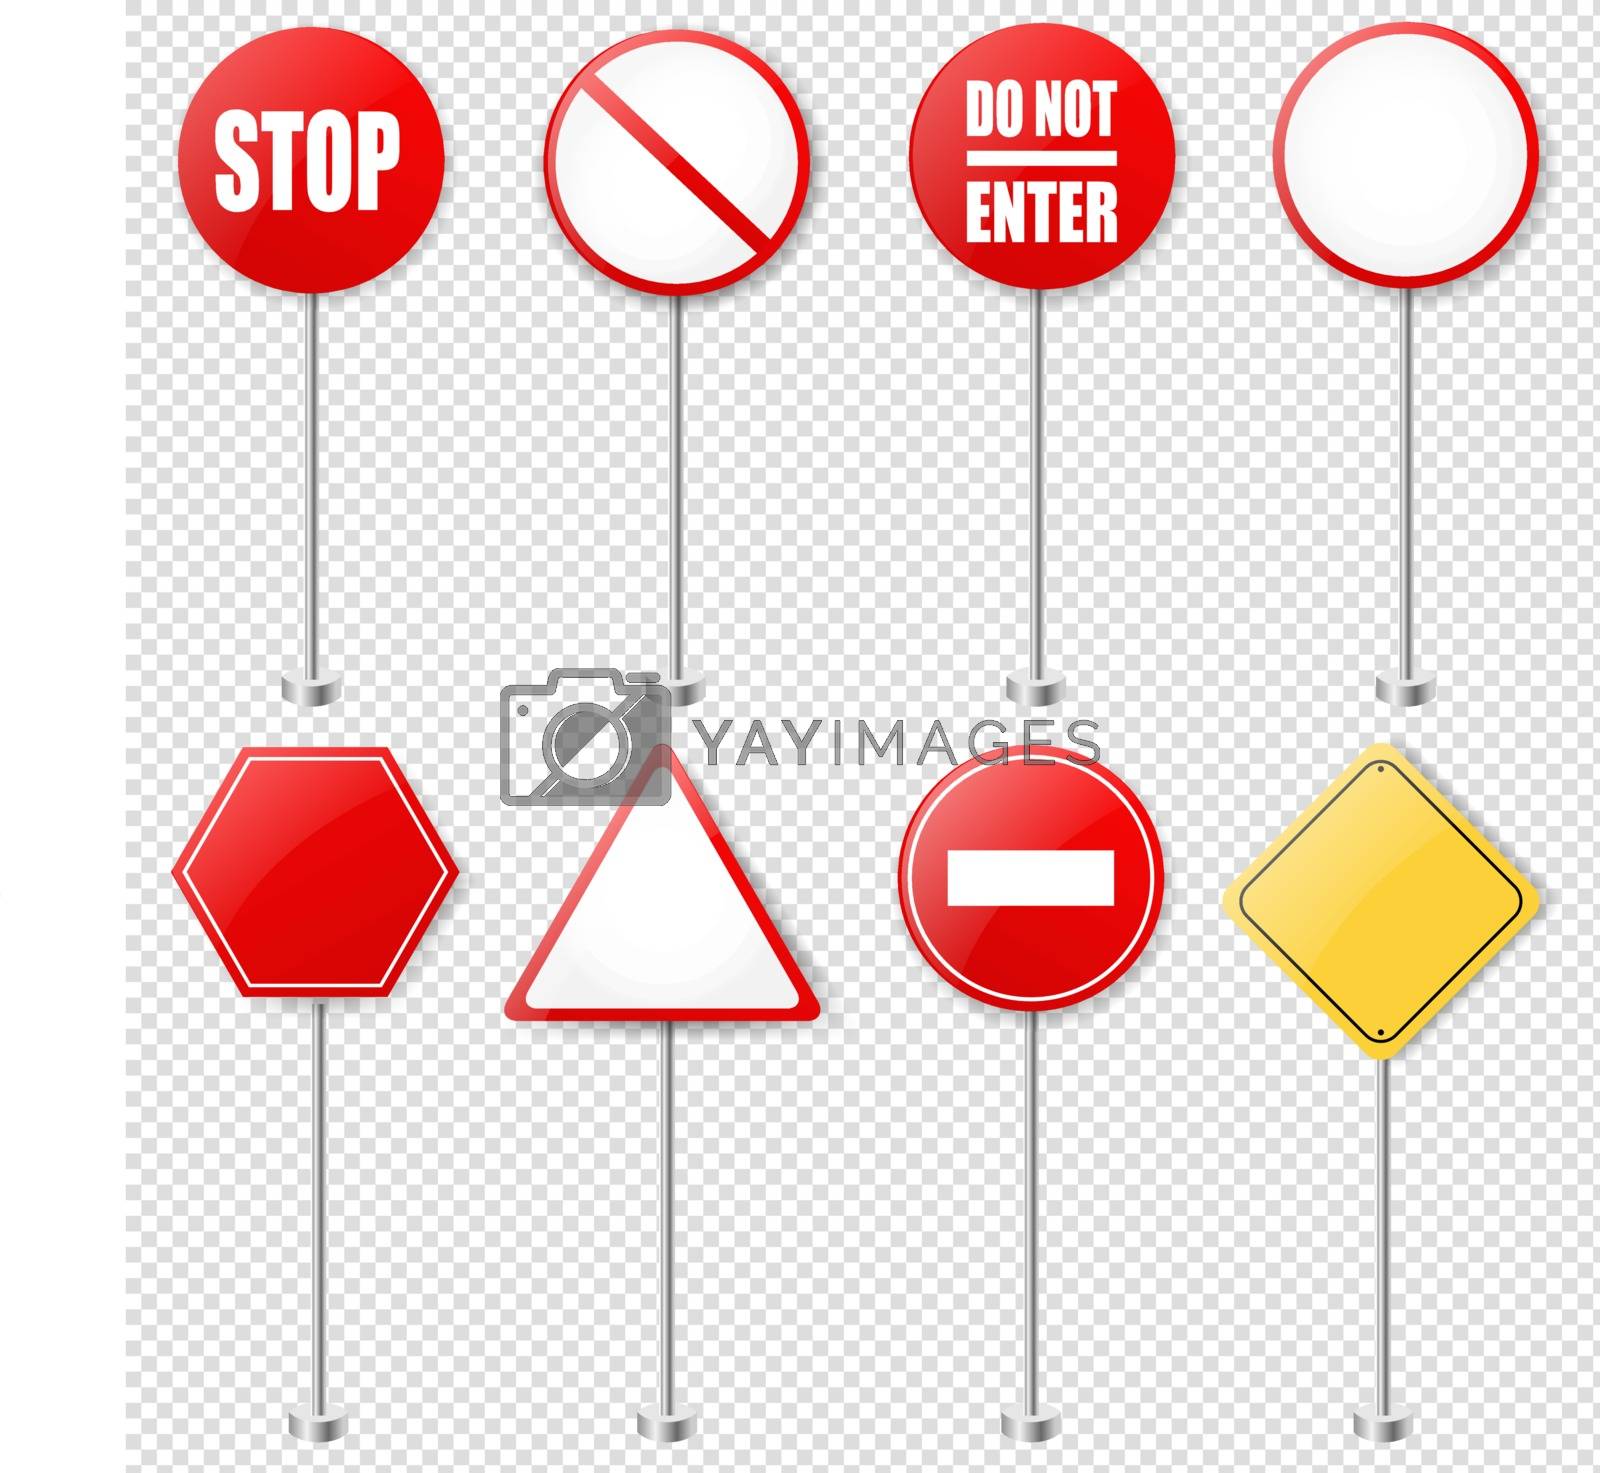 Royalty free image of Stop Signs And Traffic Sign Collection Transparent Background by cammep